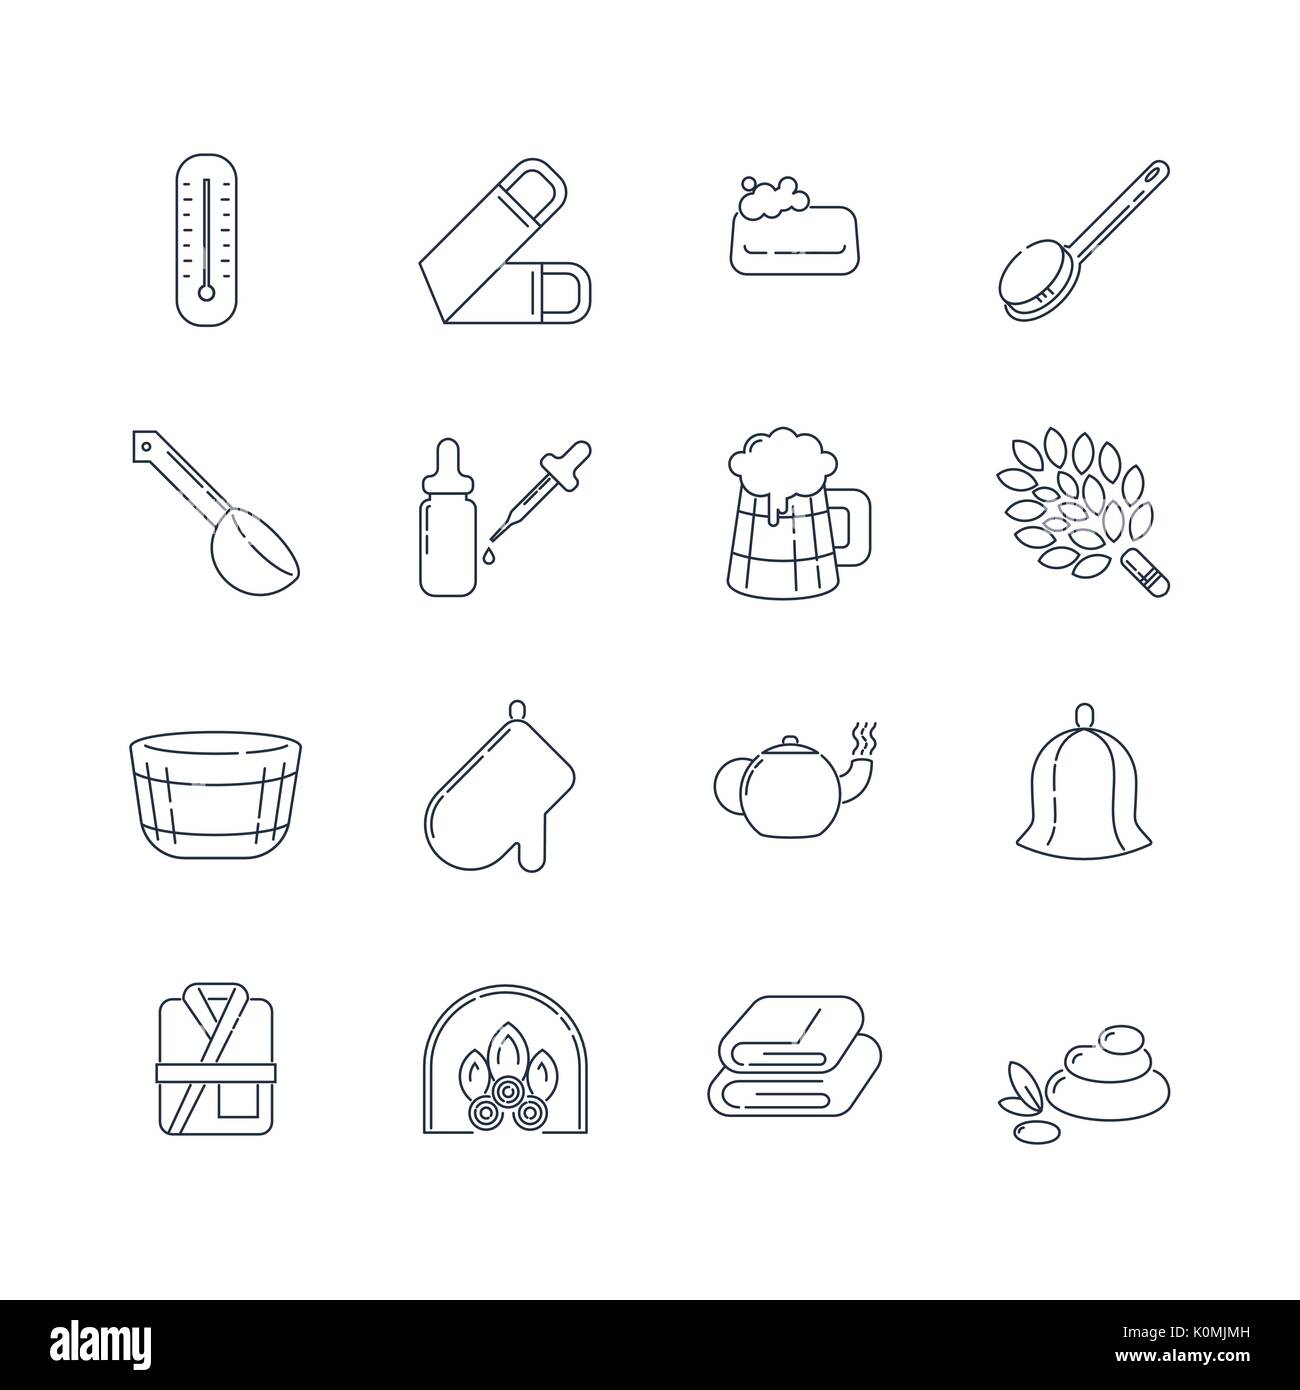 Spa, sauna linear icons. Washcloth, soap, ladle, aromatic oil, beer, broom for a bath and other accessories for spa relaxation. Health and body care thin line icons Stock Vector